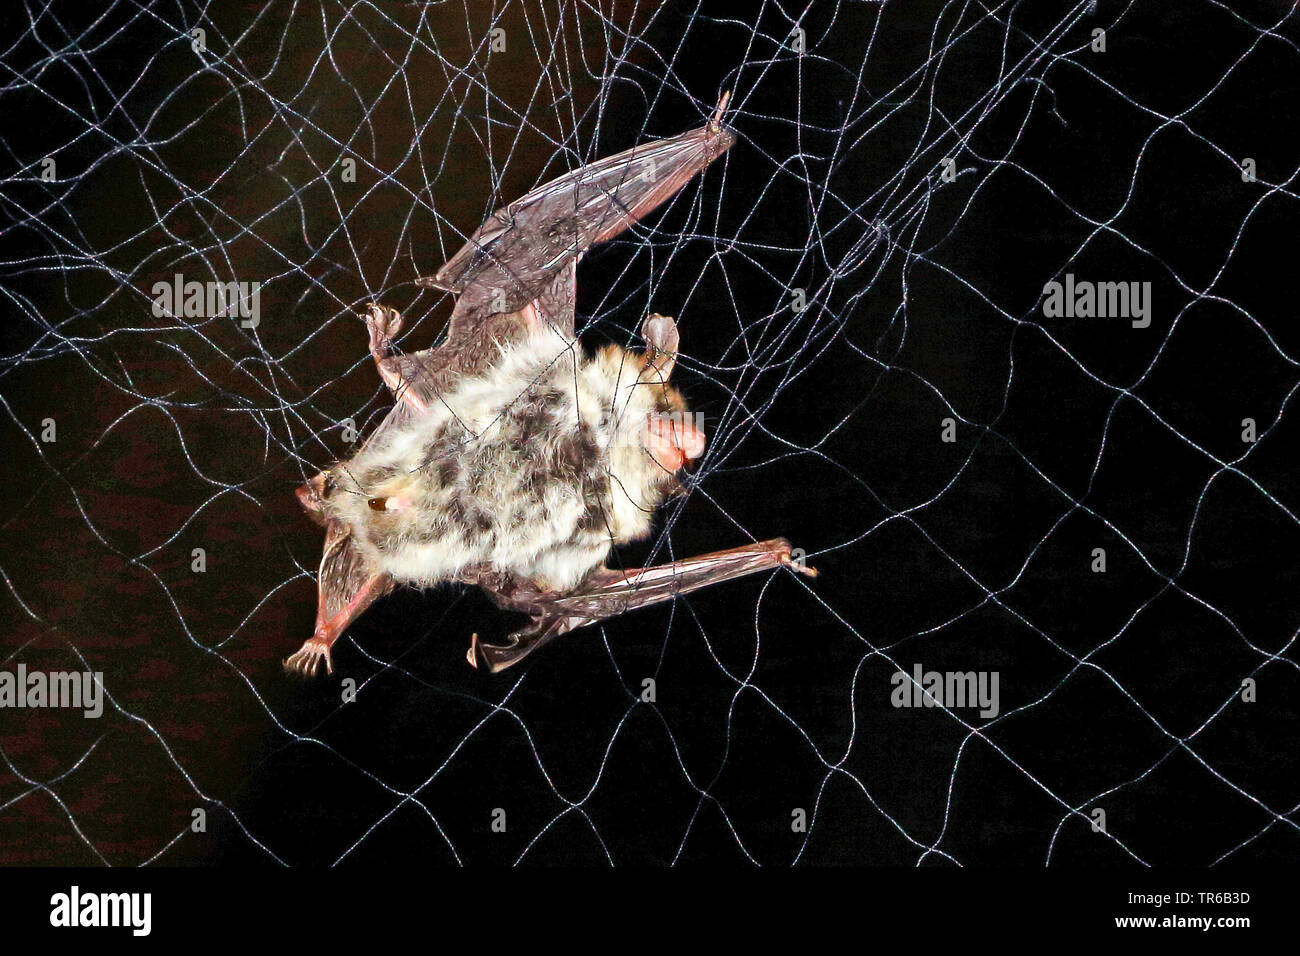 Bat caught in net for research purposes, Rhineland-Palatinate